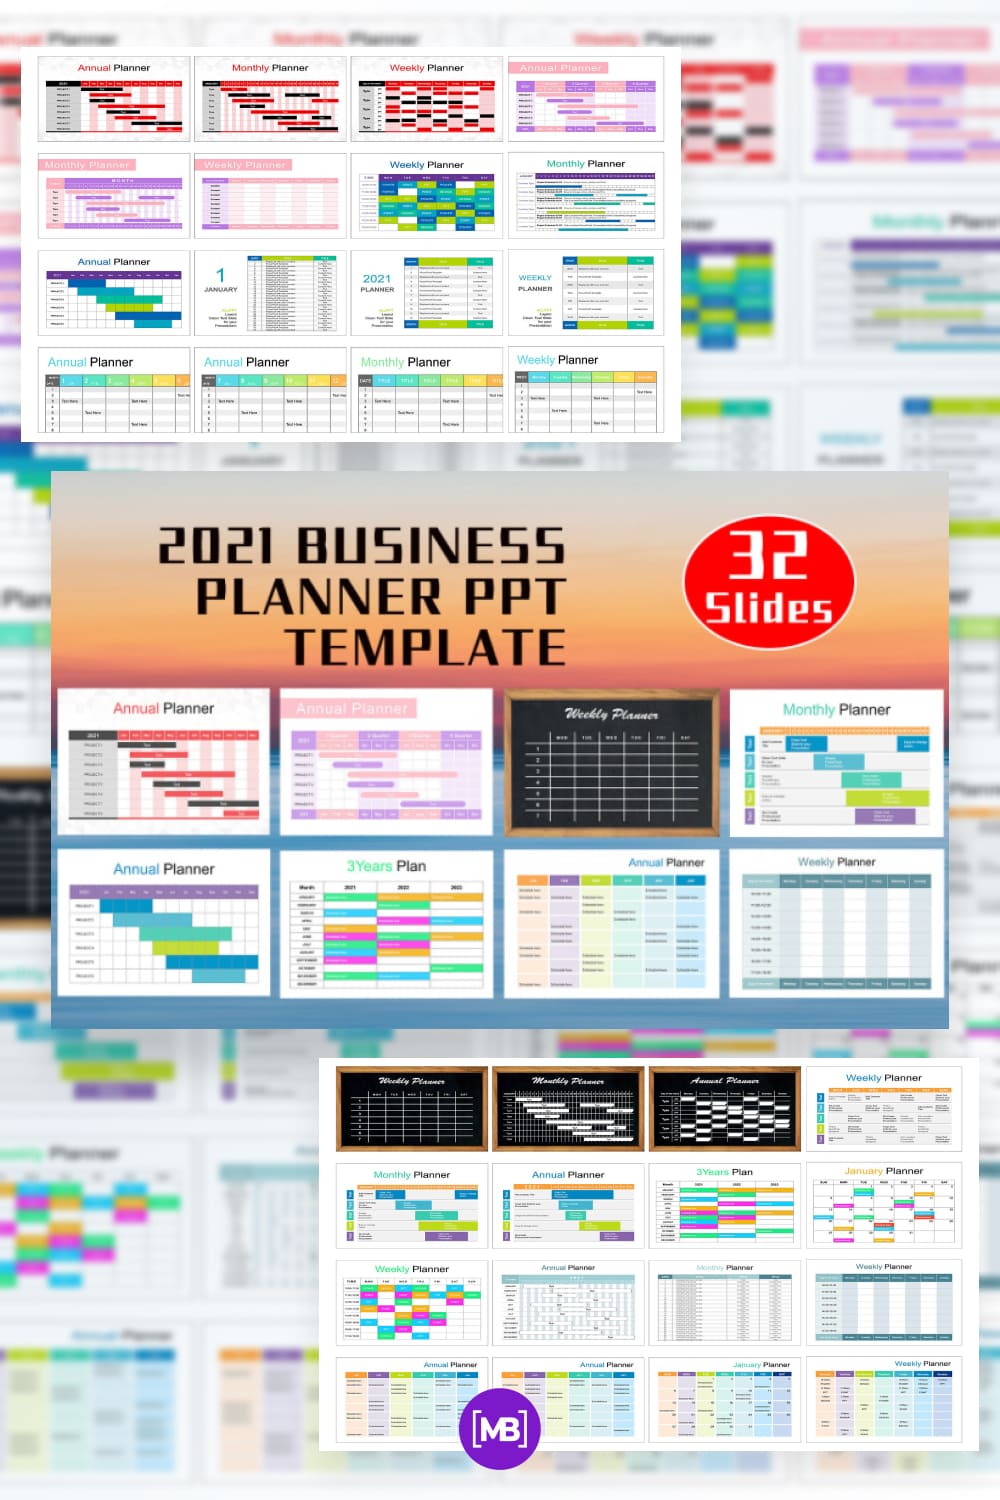 2021 business planner powerpoint template<.